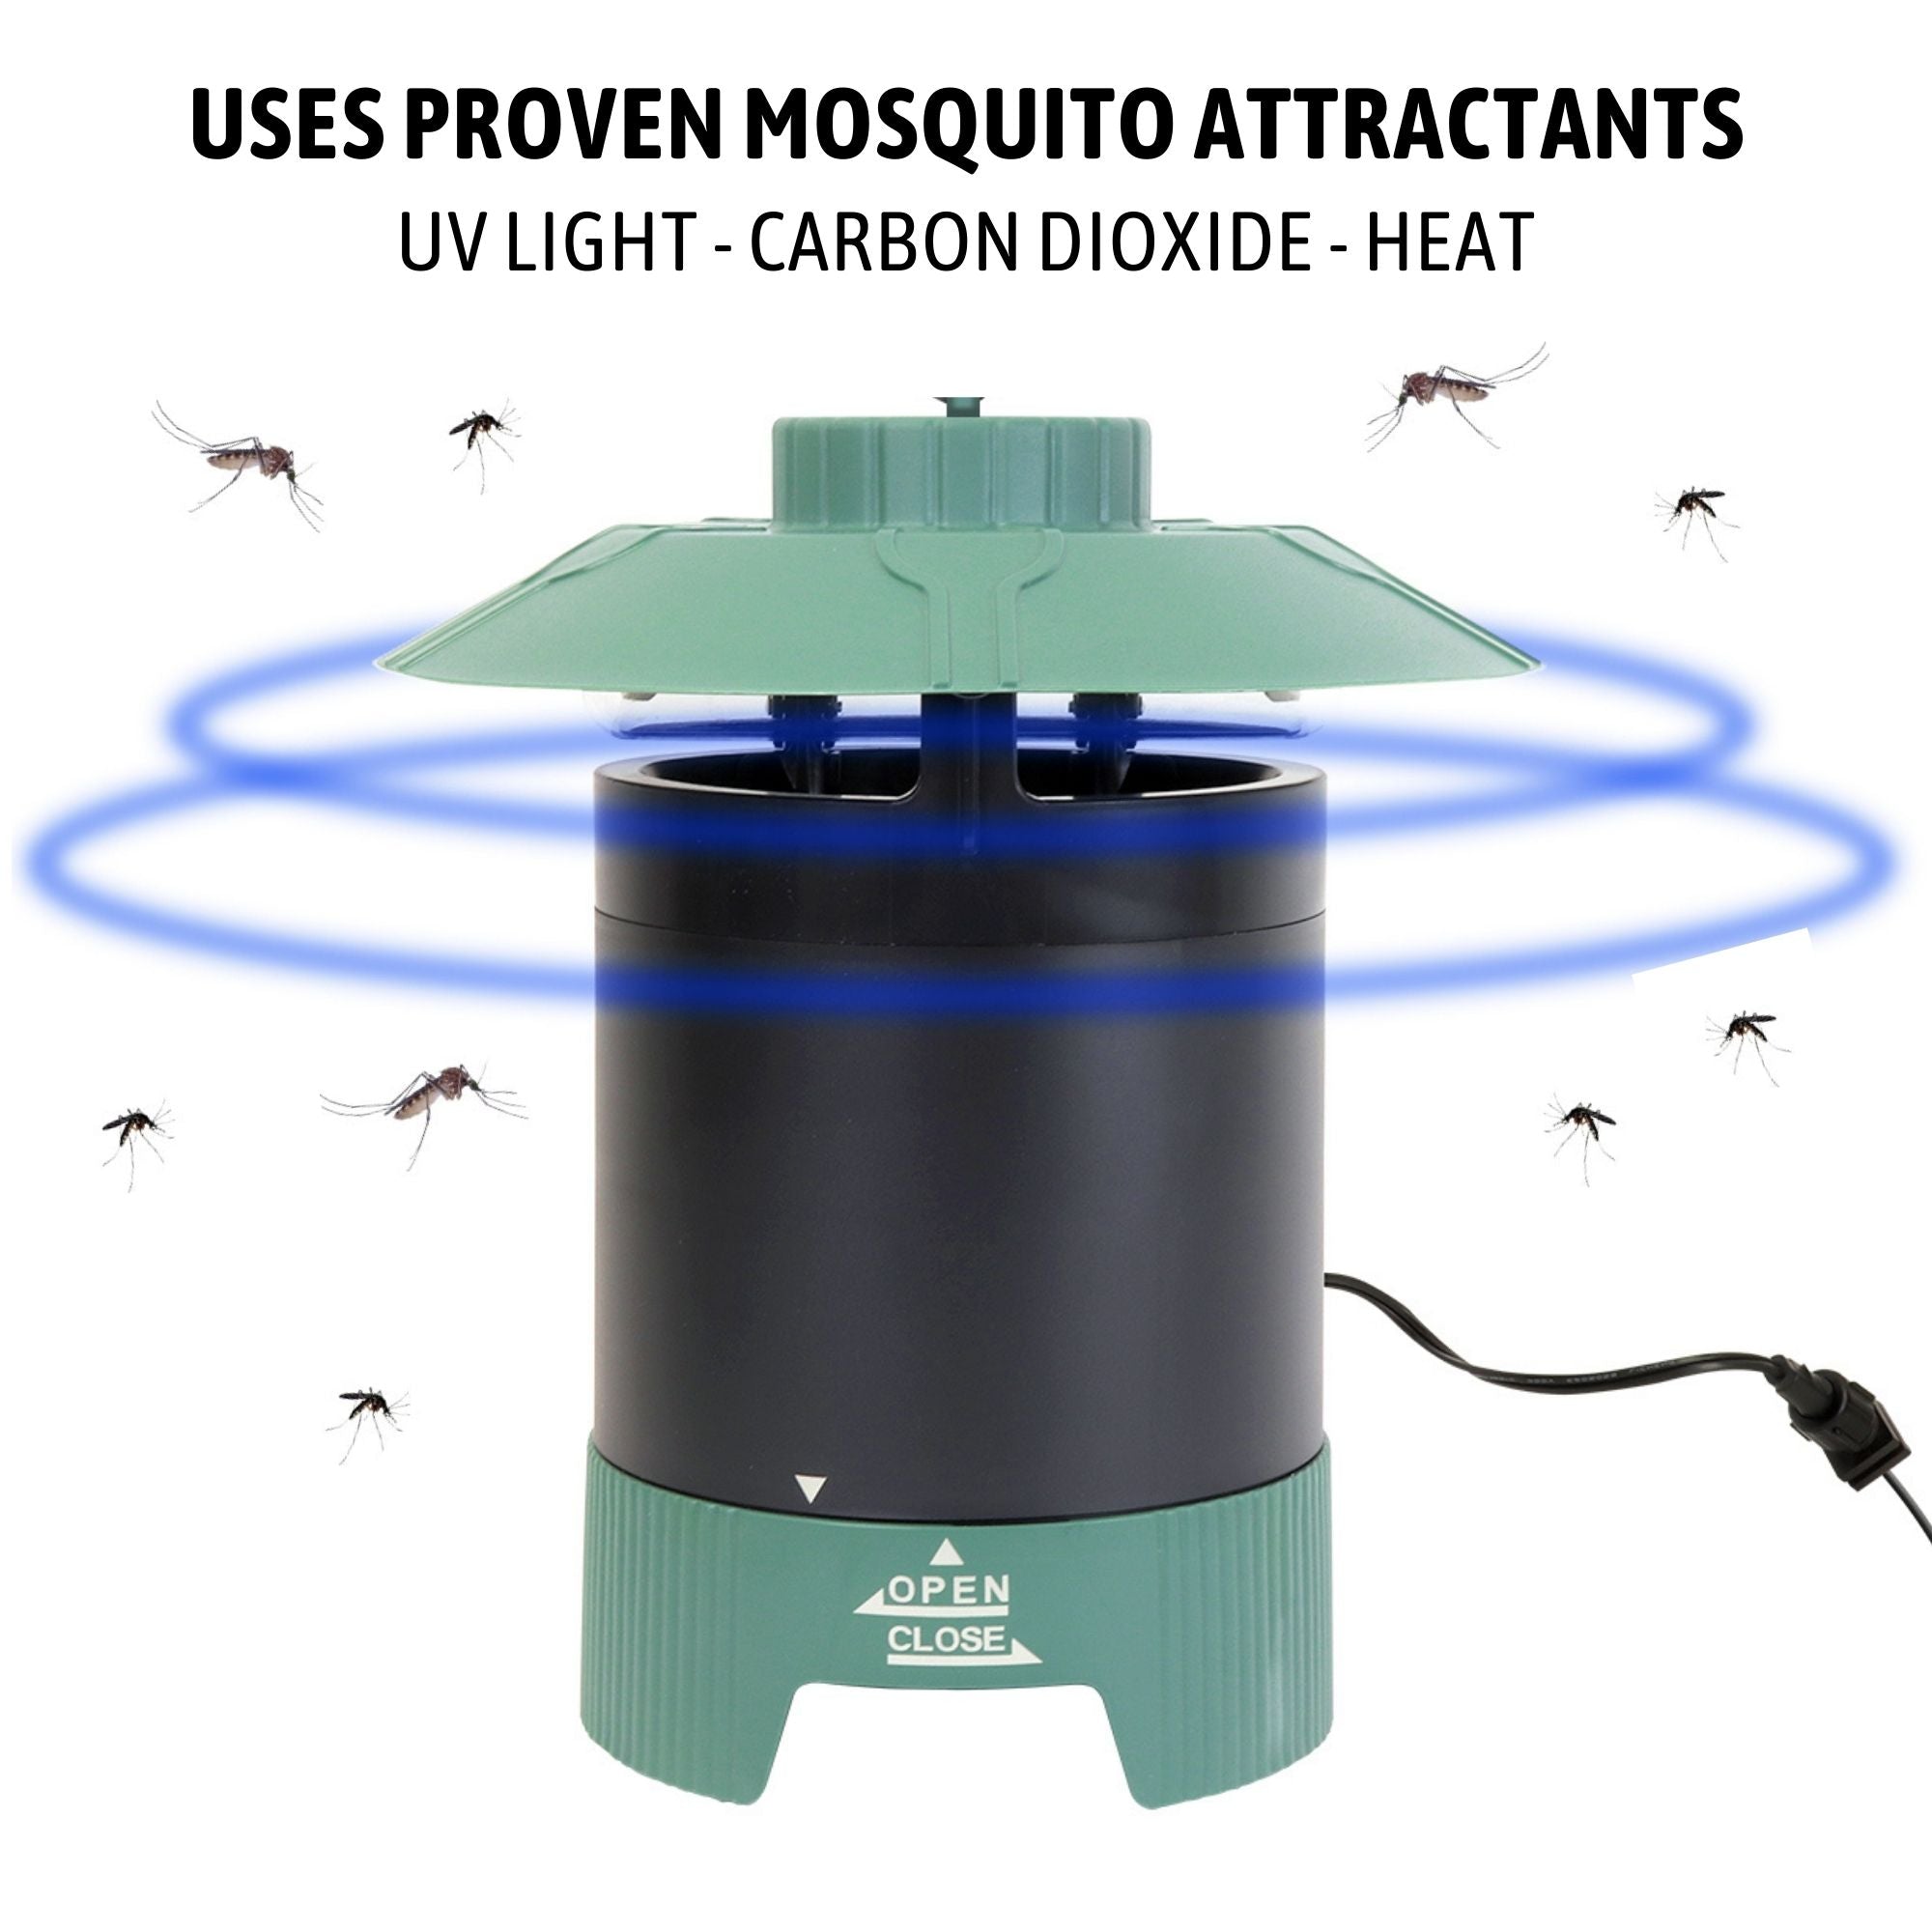 Enhanced image of Bite Shield Protector 1/4 acre mosquito trap on a white background with mosquitoes flying towards it from either side and two blue rings around it indicating the UV light. Text above reads, "Uses proven mosquito attractants: UV light - carbon dioxide - heat"